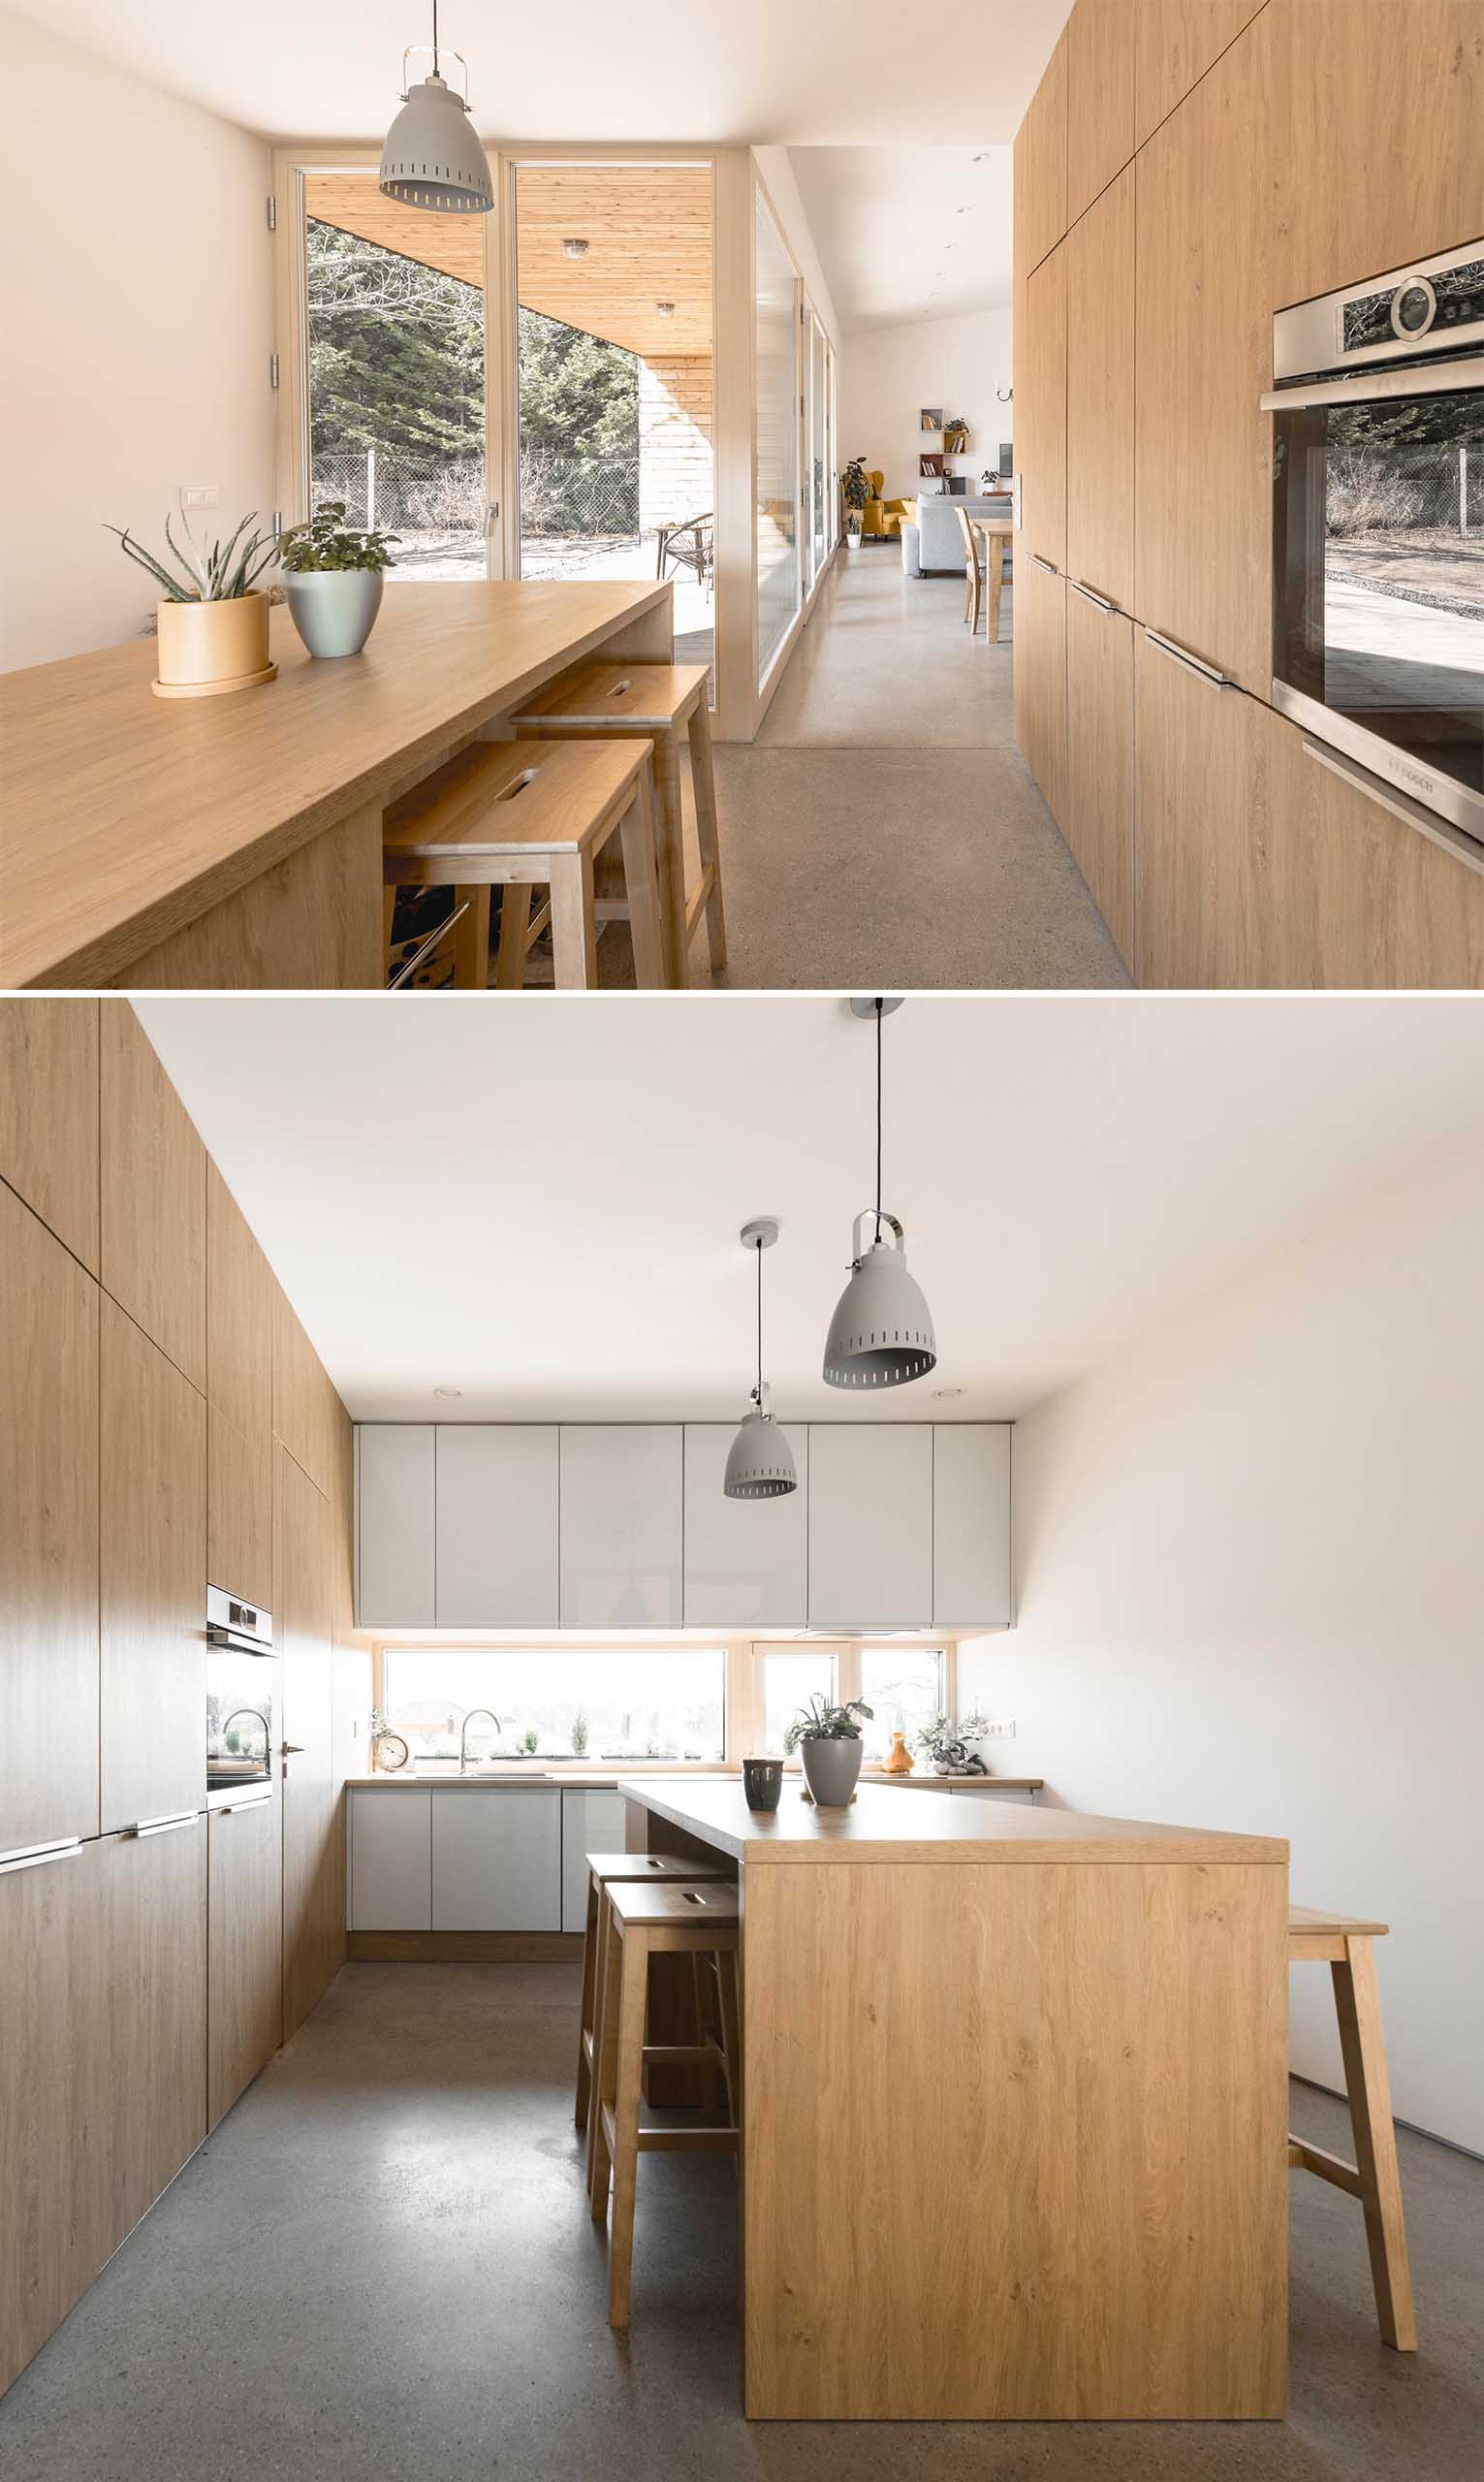 In this modern kitchen, there's wood cabinets and an island, as well as concrete floors.